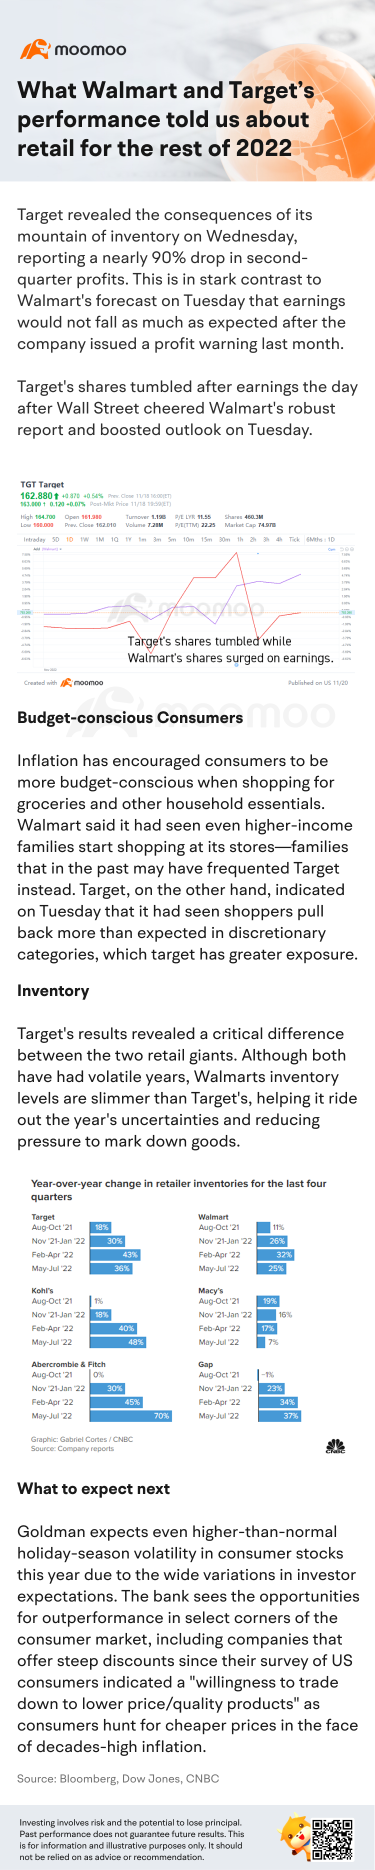 What Walmart and Target's Performance Told Us About Retail for the Rest of 2022